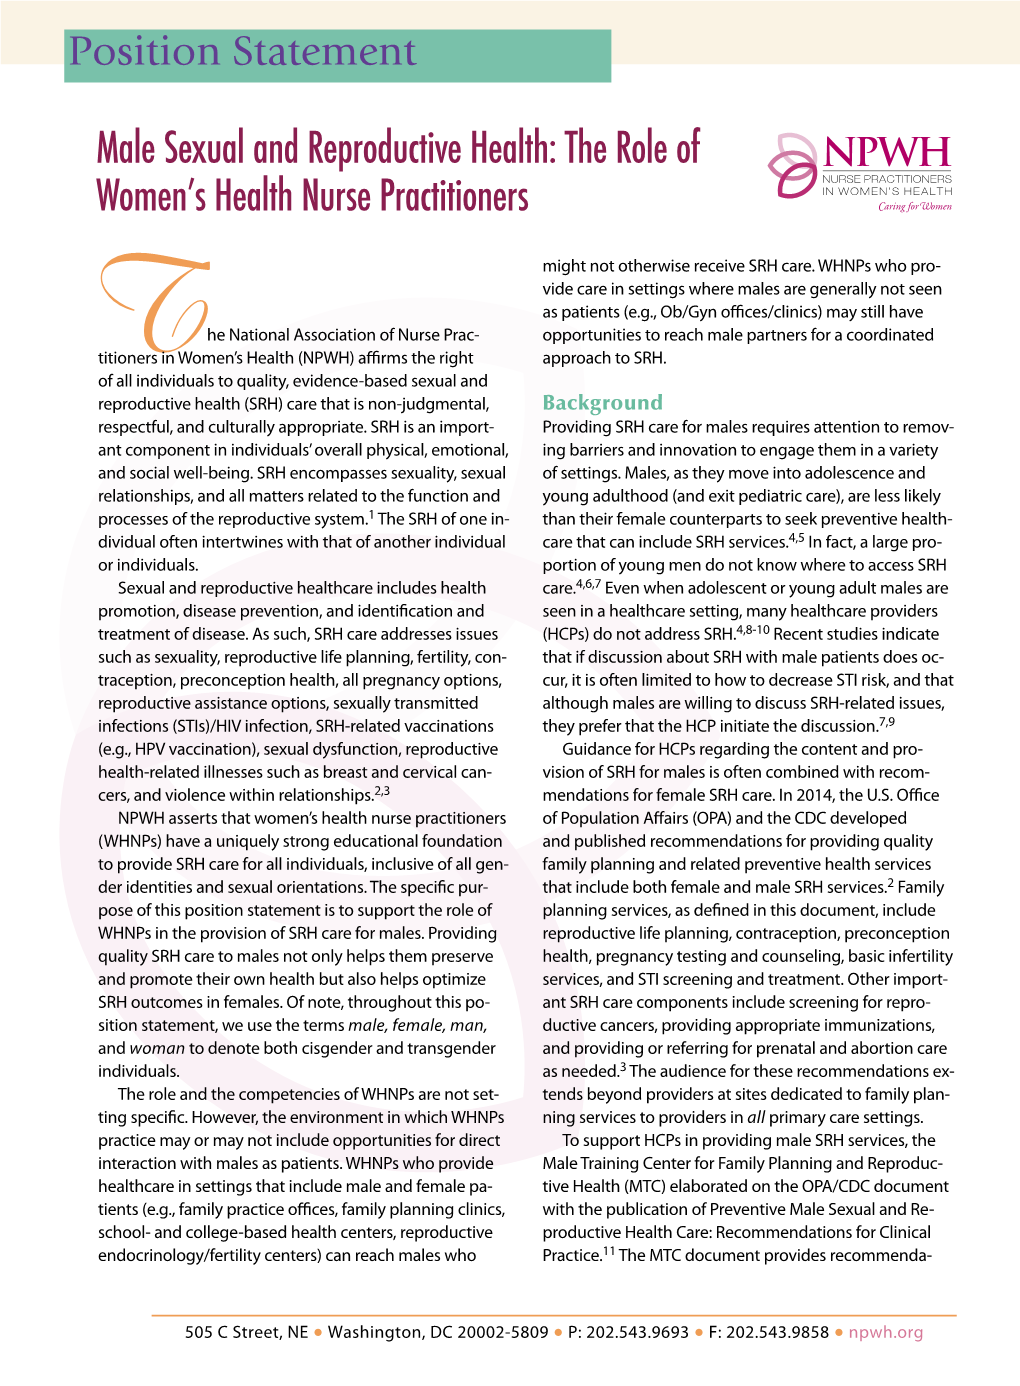 Male Sexual and Reproductive Health: the Role of Women’S Health Nurse Practitioners